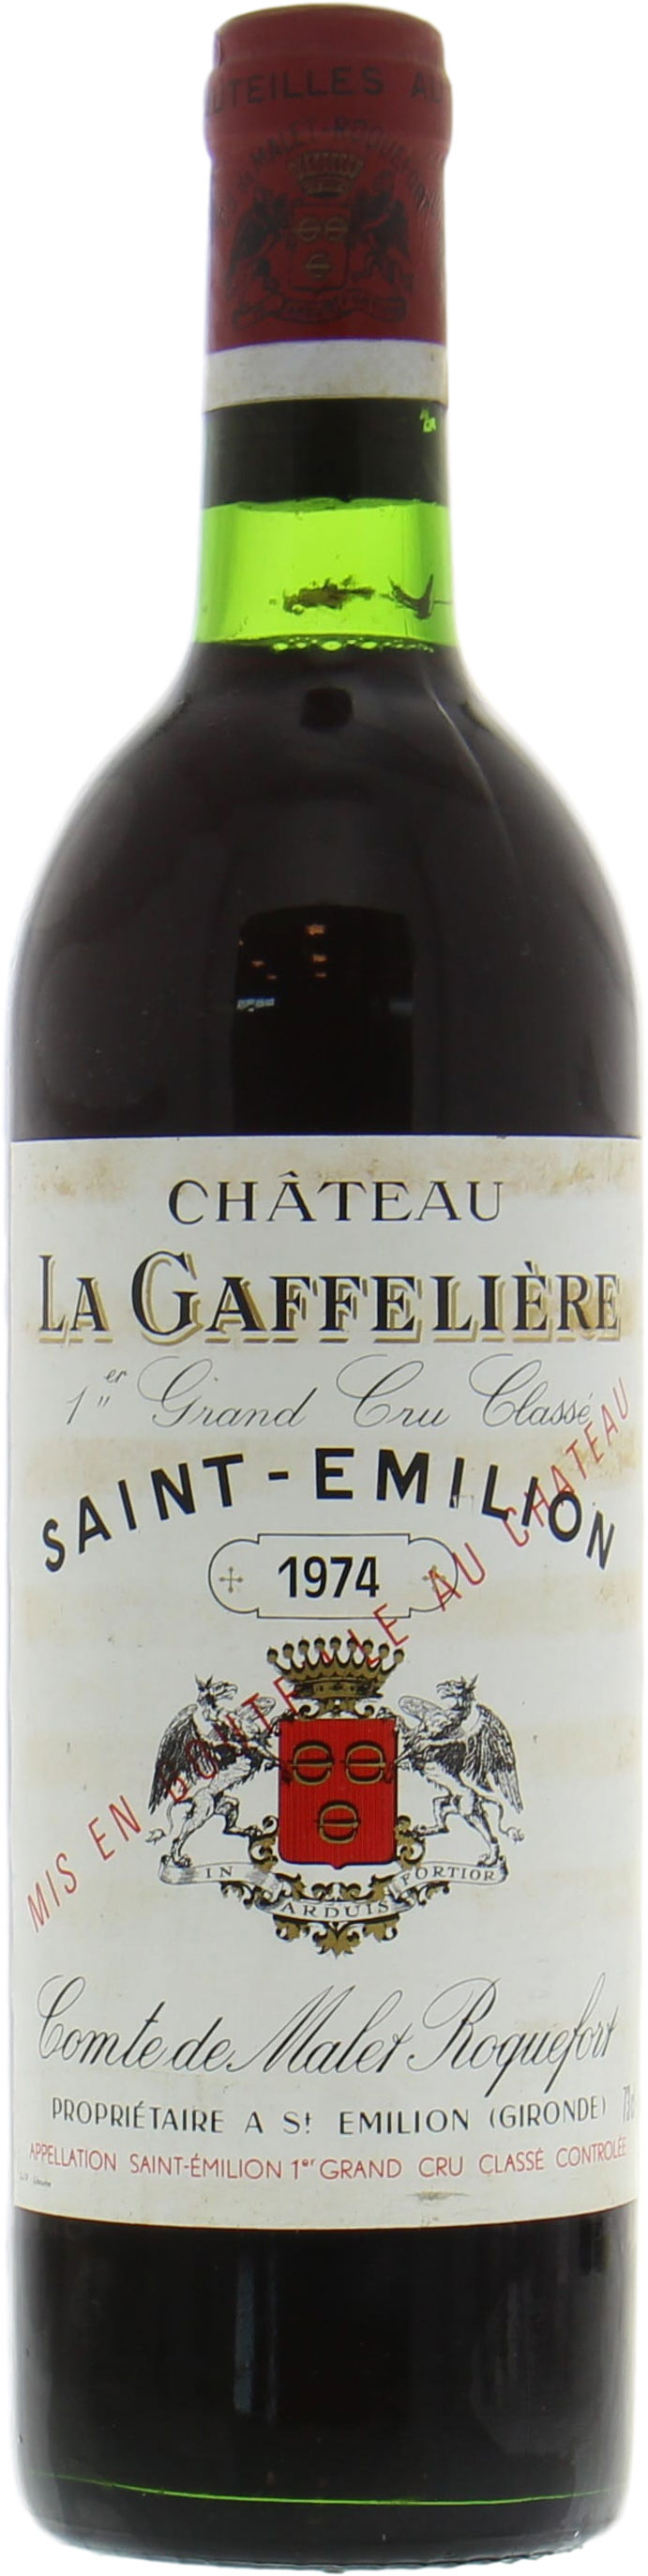 Chateau La Gaffeliere - Chateau La Gaffeliere 1974 Base of neck or better